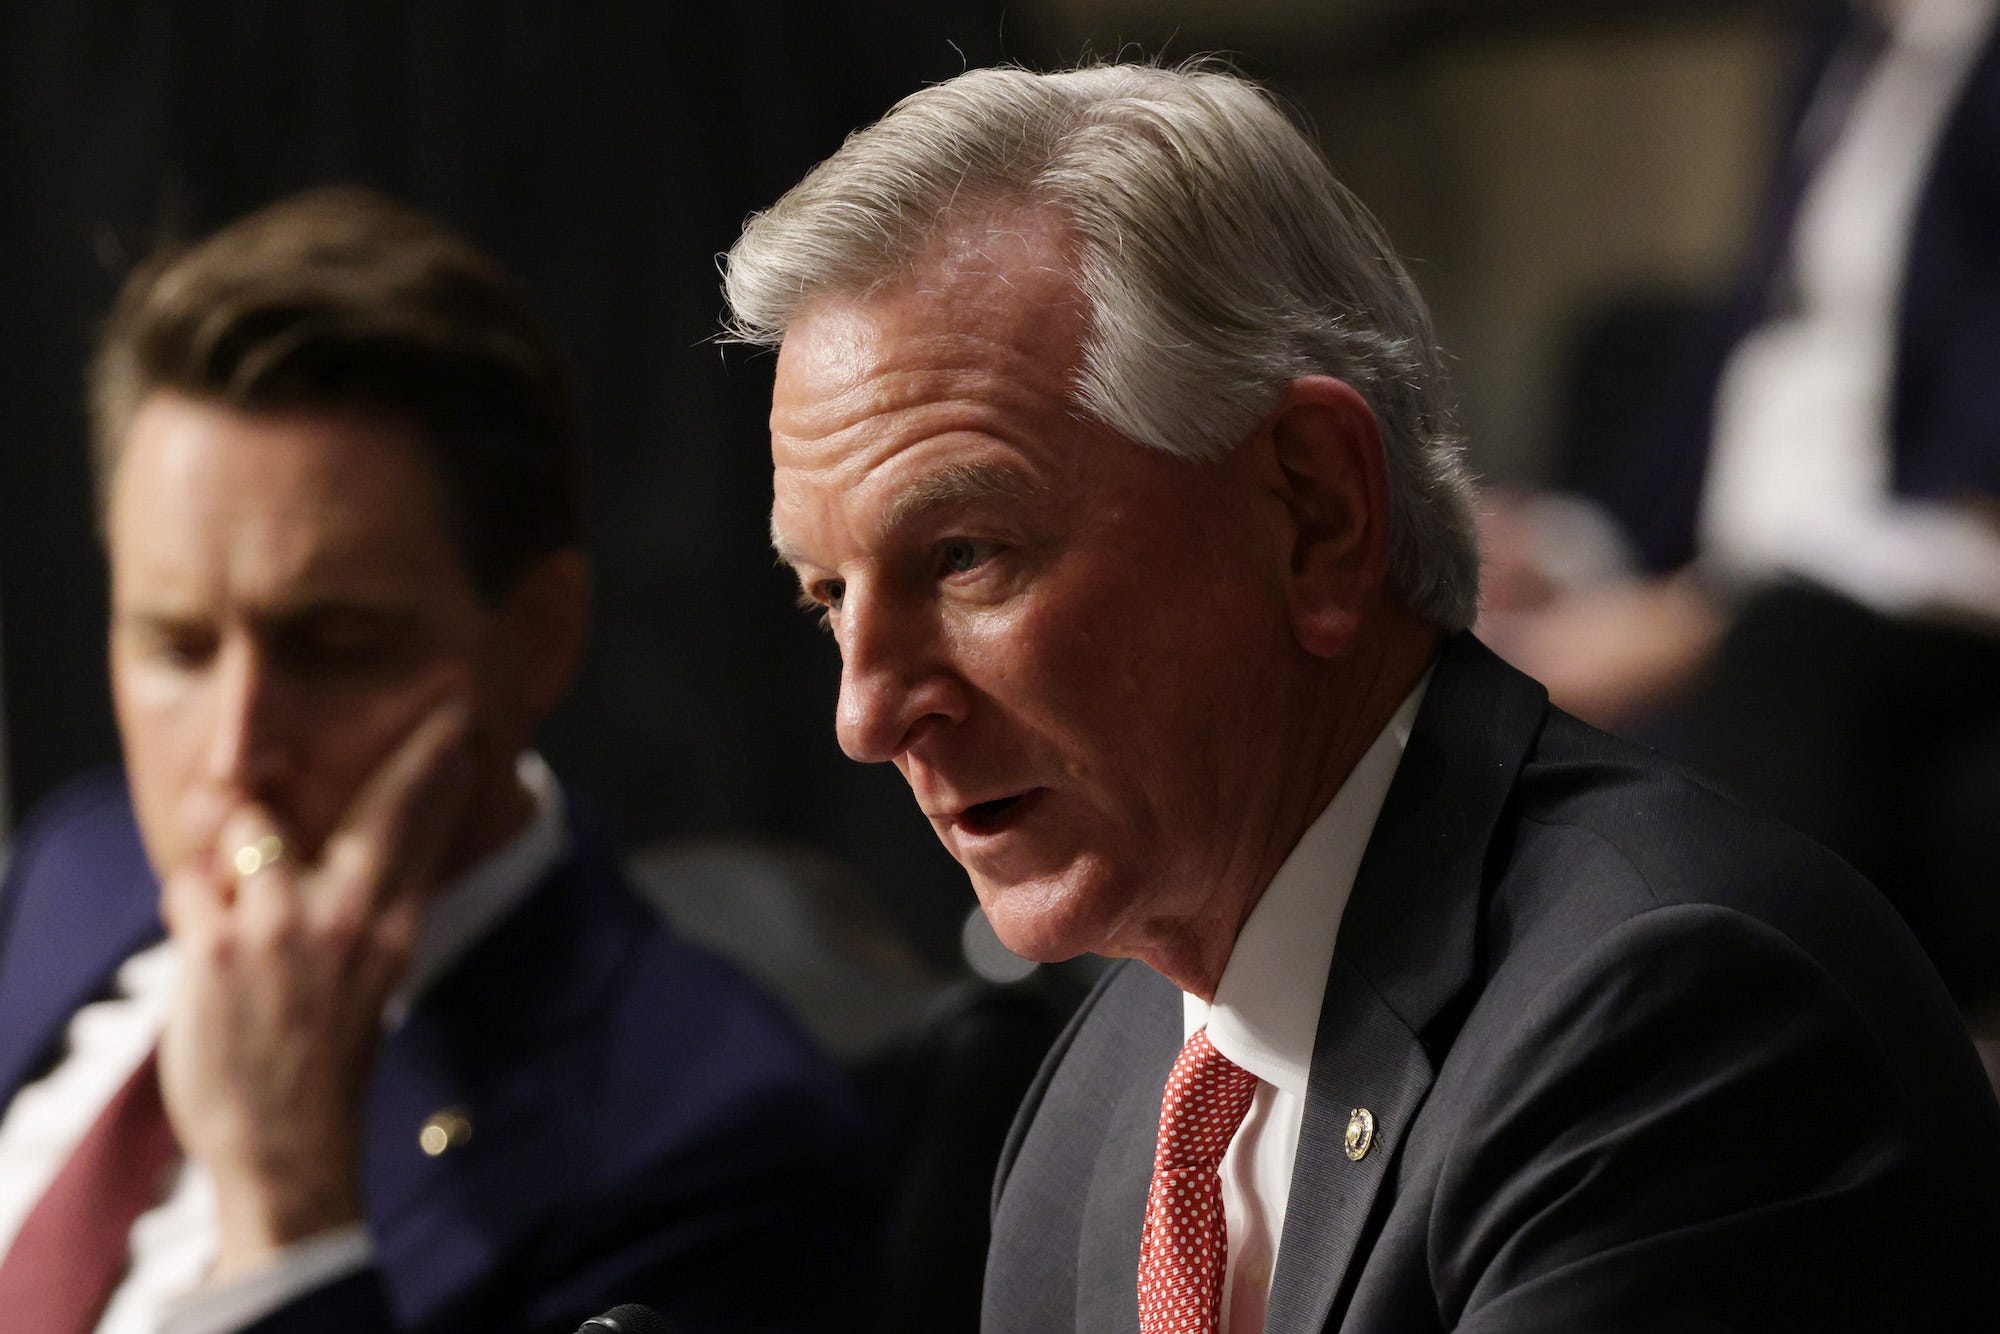 Republican Sen. Tommy Tuberville of Alabama leans forward to make a statement during a committee hearing on Capitol Hill.